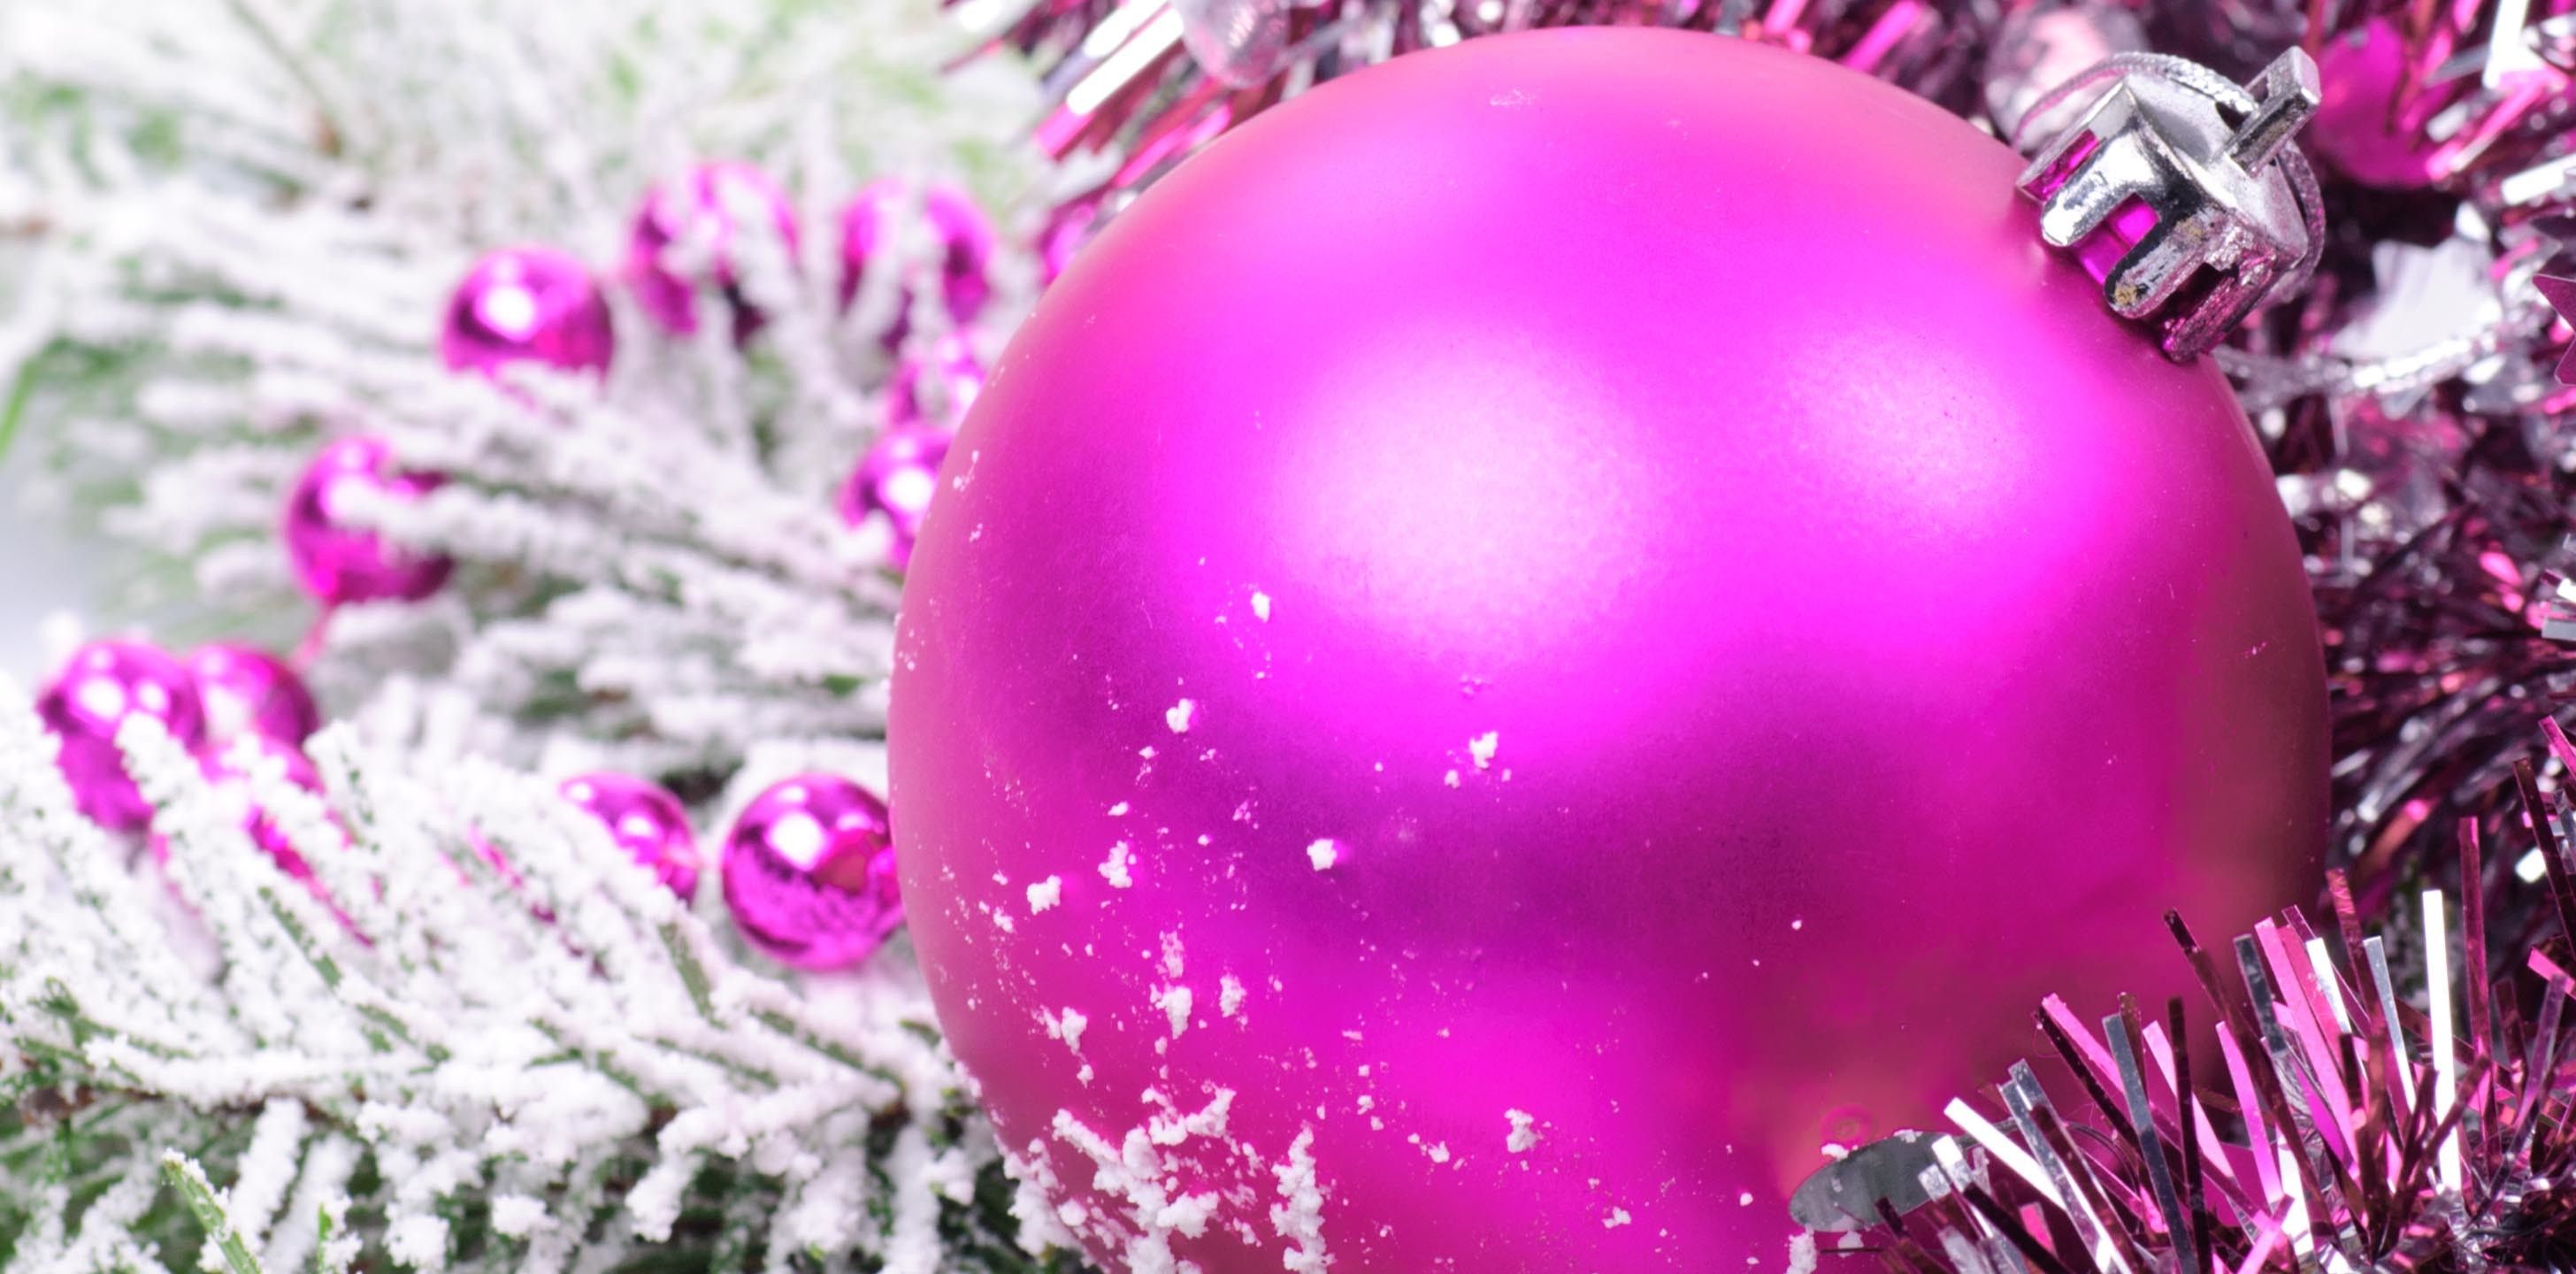 Pink Christmas Wallpaper Free Pink Christmas Background